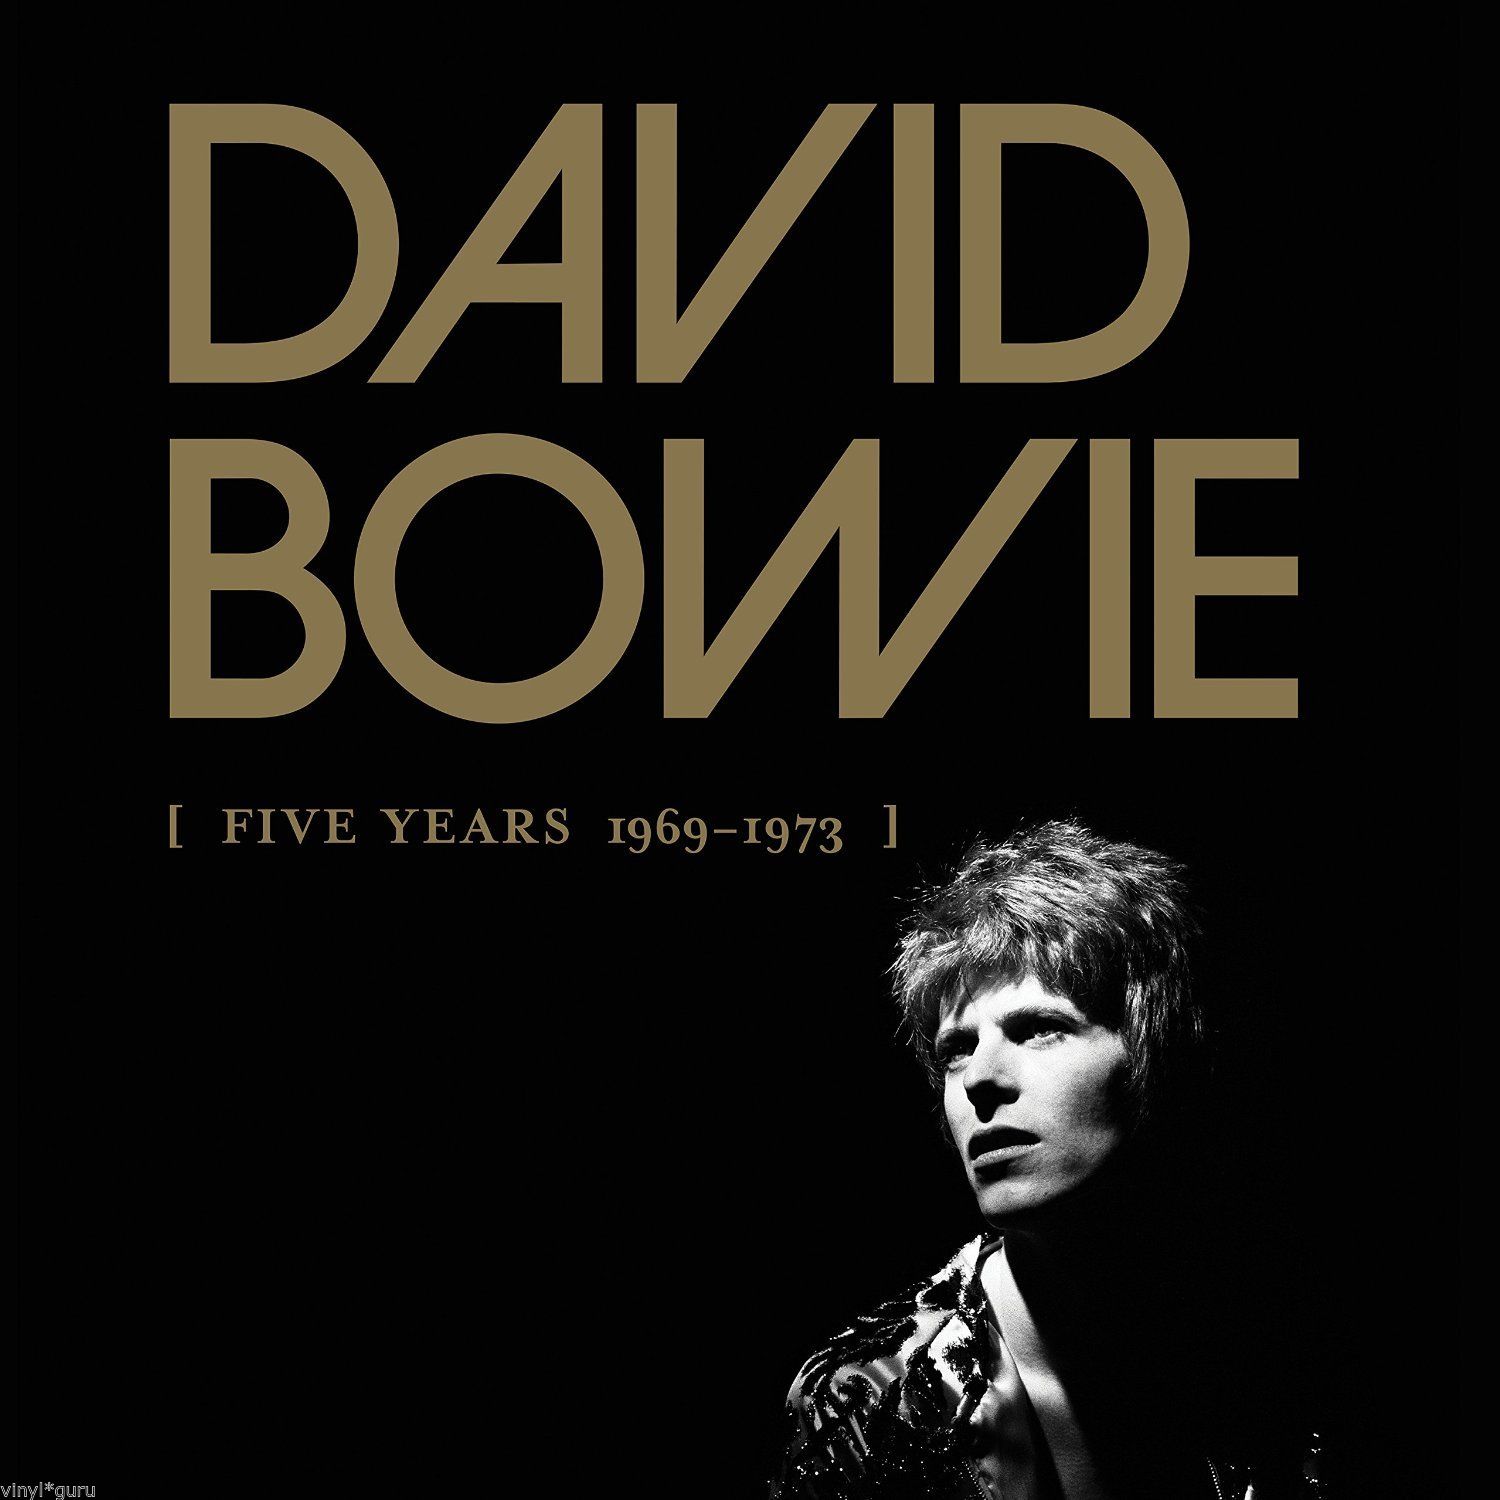 DAVID BOWIE FIVE YEARS 1969-1973 COMPLETE VINYL BOXED SET (NO BOOK)